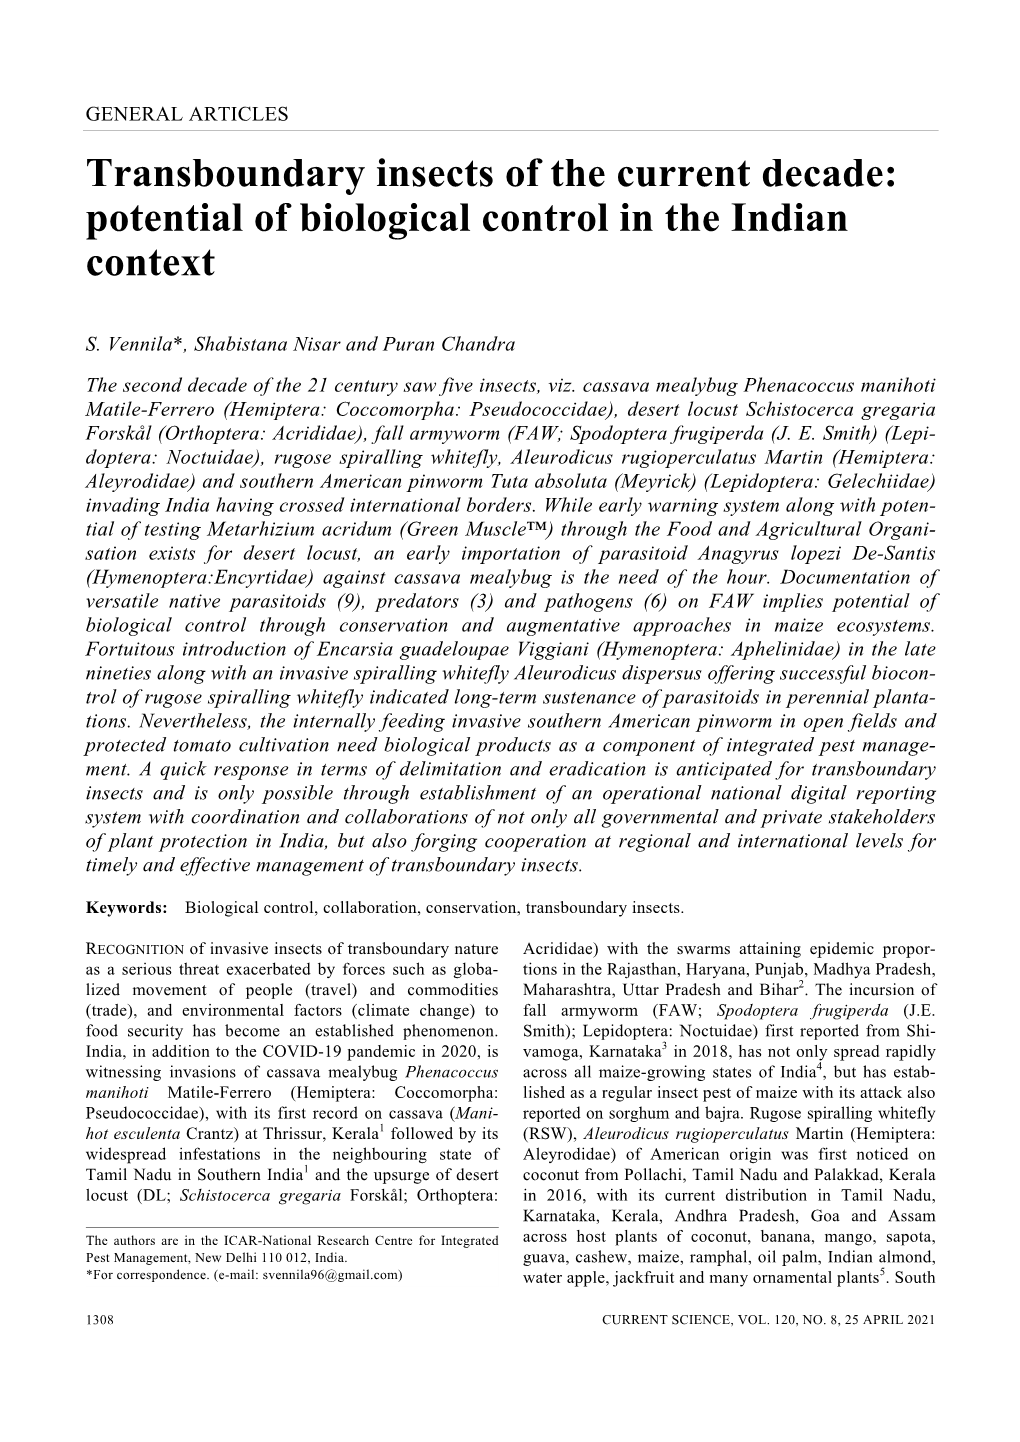 Transboundary Insects of the Current Decade: Potential of Biological Control in the Indian Context